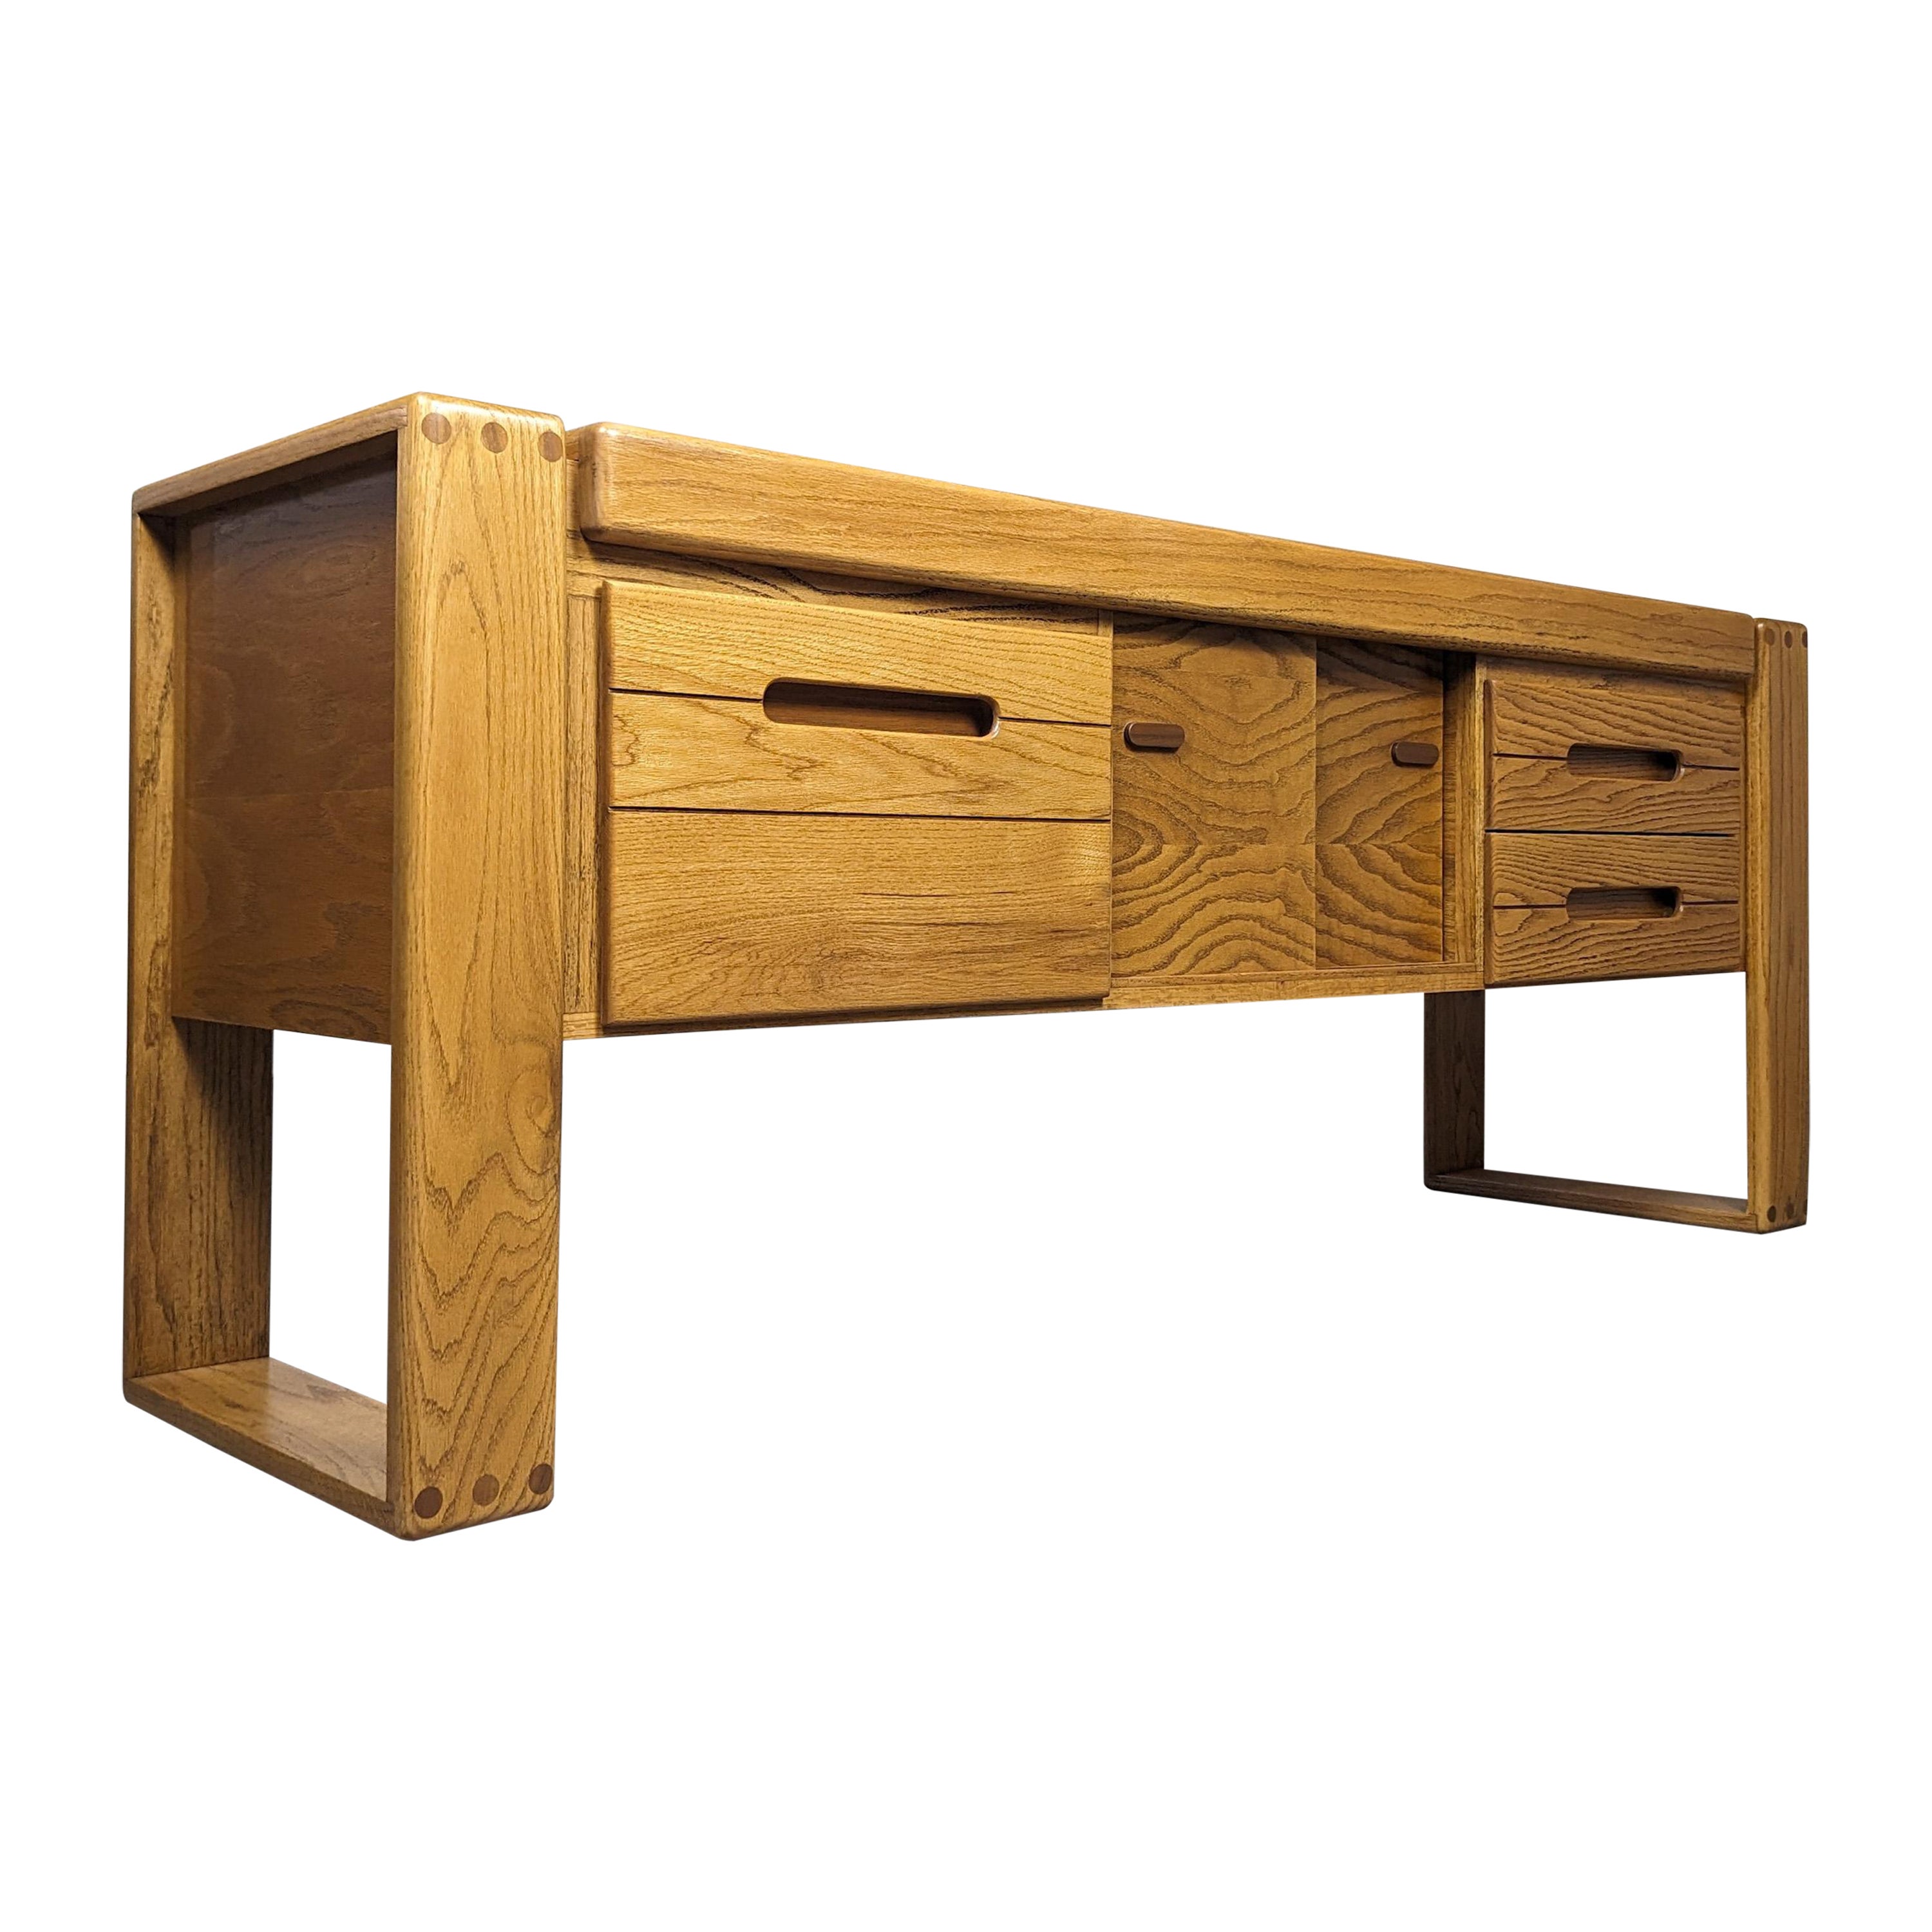 Lou Hodges Handcrafted Oak Credenza for California Design Group, c1980s For Sale